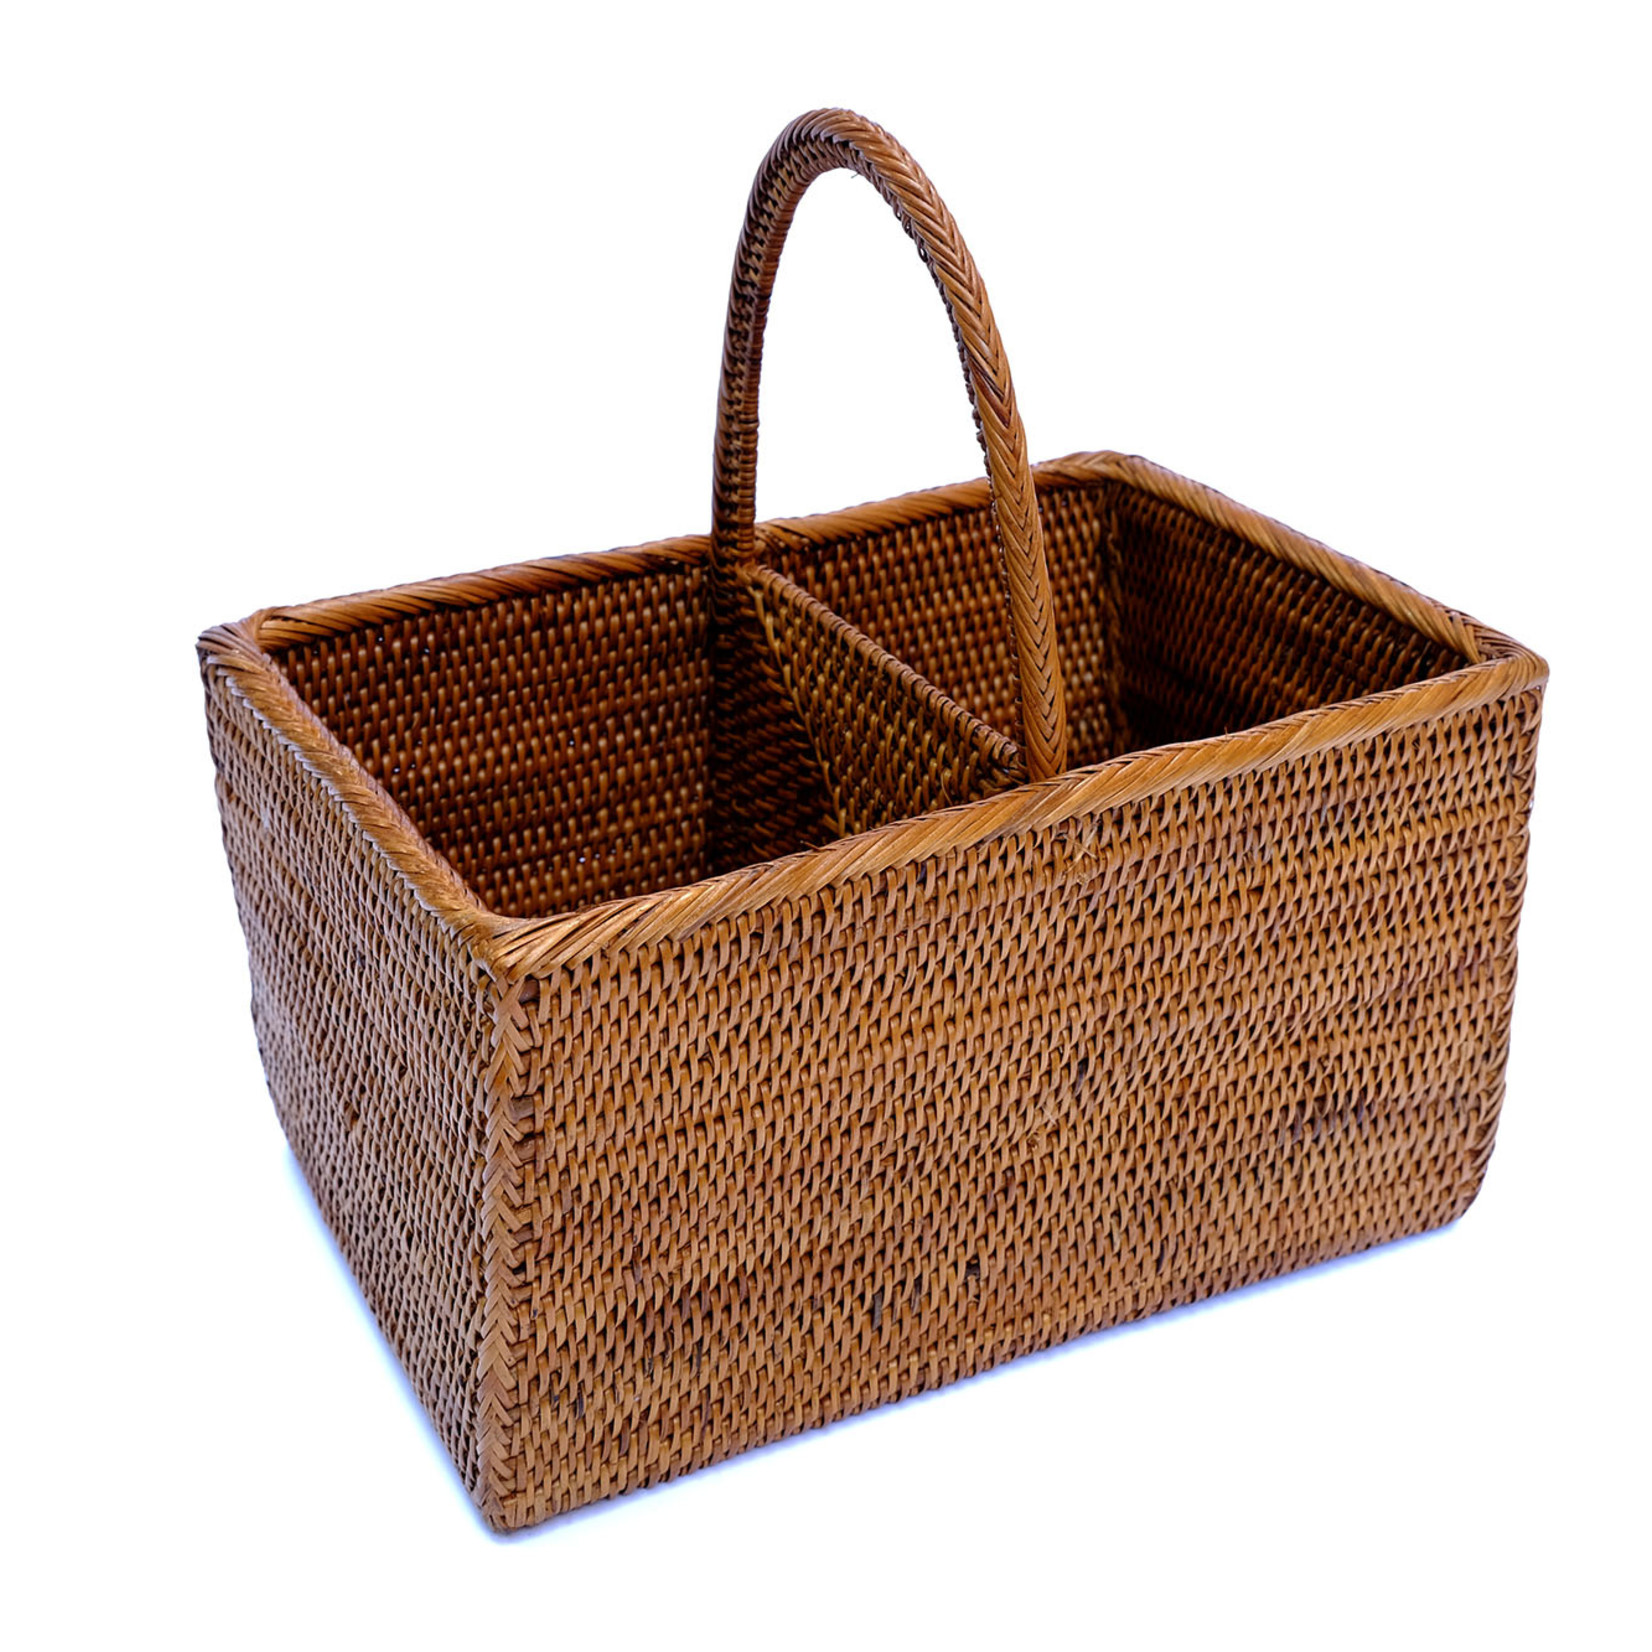 Hand Woven Ata Basket #11 Divided with Handle